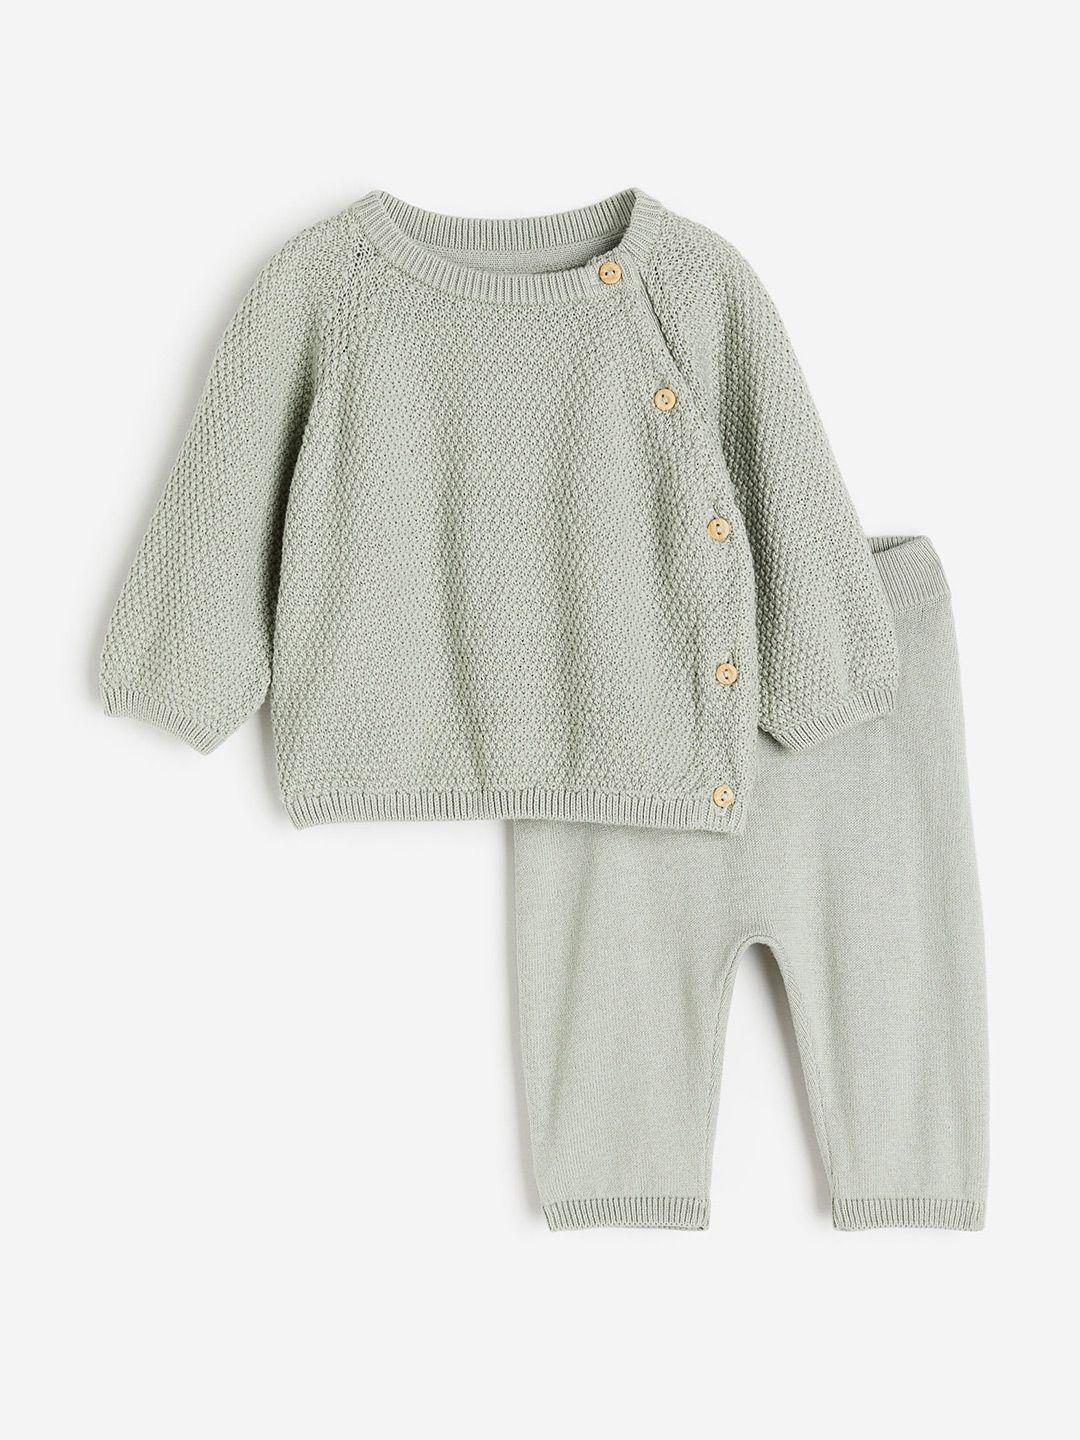 h&m boys 2-piece knitted pure cotton set